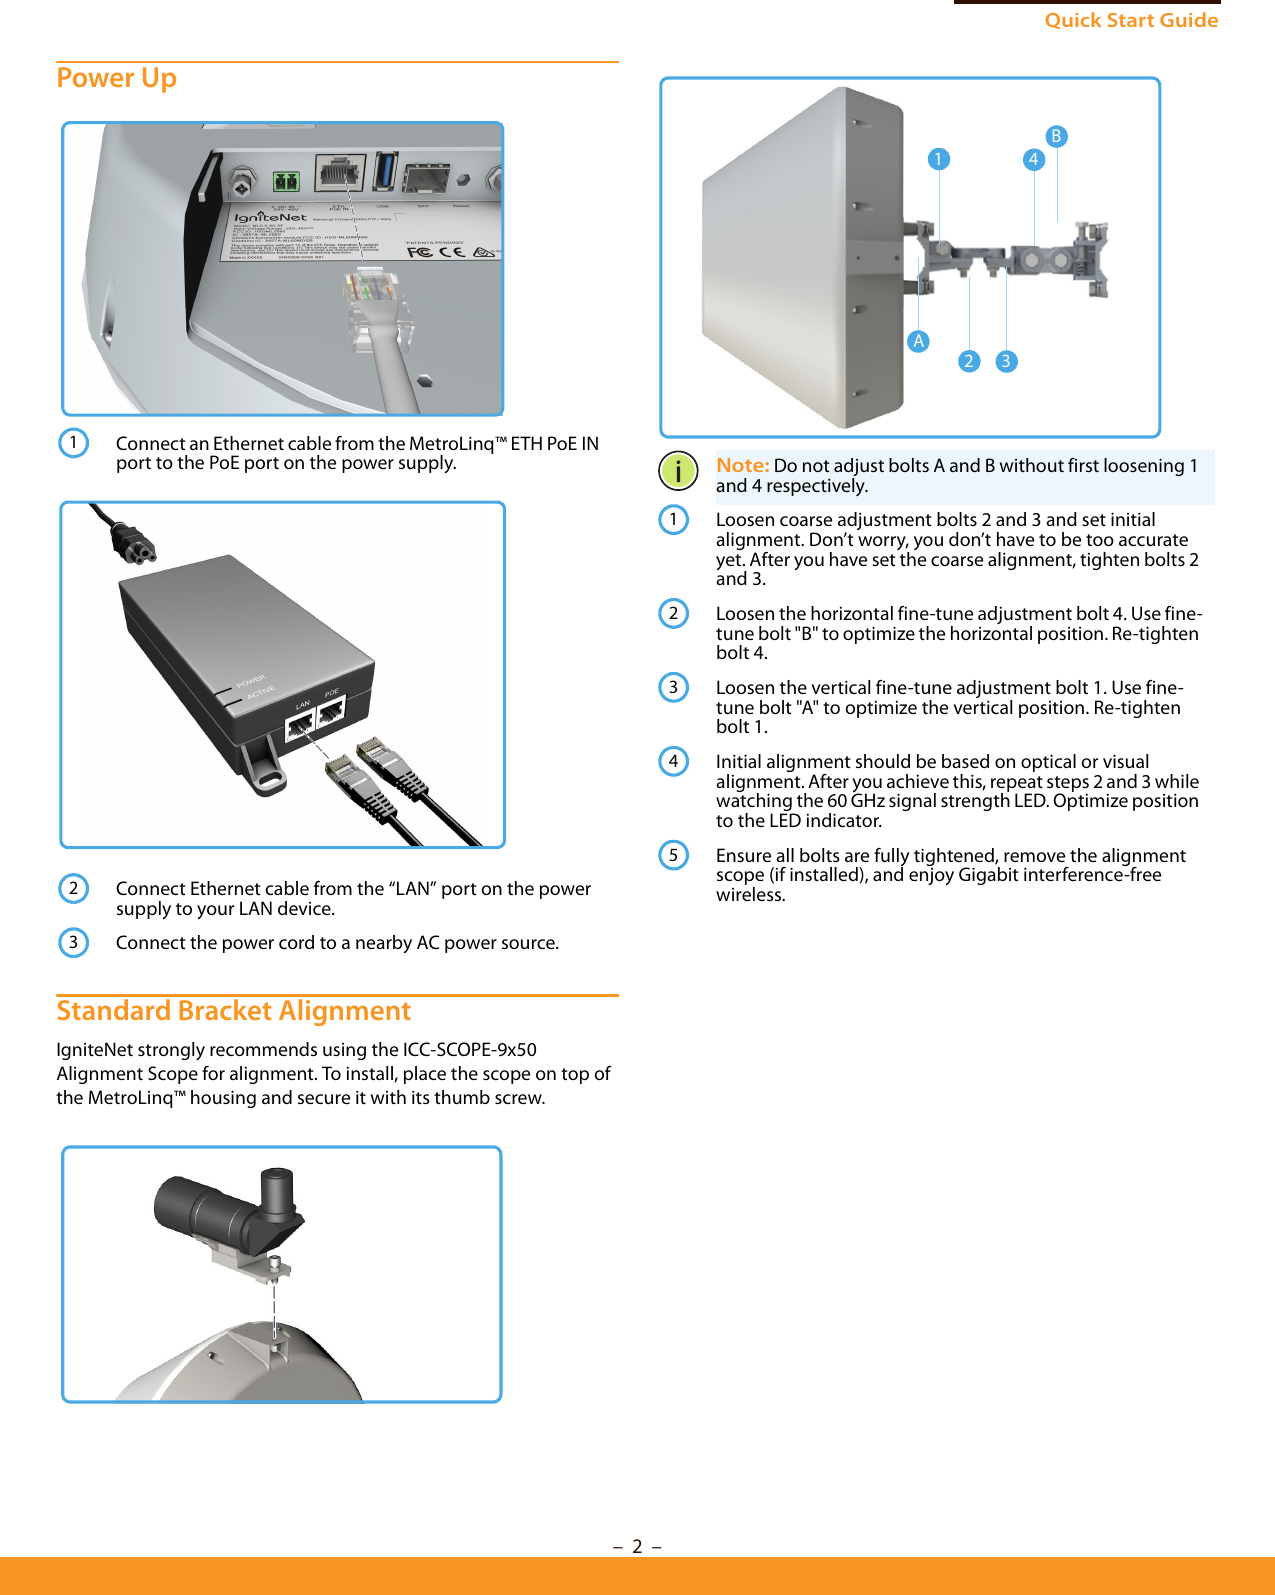 Quick Start Guide–  2  –Power Up Standard Bracket AlignmentIgniteNet strongly recommends using the ICC-SCOPE-9x50 Alignment Scope for alignment. To install, place the scope on top of the MetroLinq™ housing and secure it with its thumb screw.Connect an Ethernet cable from the MetroLinq™ ETH PoE IN port to the PoE port on the power supply.Connect Ethernet cable from the “LAN” port on the power supply to your LAN device.Connect the power cord to a nearby AC power source.123Note: Do not adjust bolts A and B without first loosening 1 and 4 respectively.Loosen coarse adjustment bolts 2 and 3 and set initial alignment. Don’t worry, you don’t have to be too accurate yet. After you have set the coarse alignment, tighten bolts 2 and 3.Loosen the horizontal fine-tune adjustment bolt 4. Use fine-tune bolt &quot;B&quot; to optimize the horizontal position. Re-tighten bolt 4.Loosen the vertical fine-tune adjustment bolt 1. Use fine-tune bolt &quot;A&quot; to optimize the vertical position. Re-tighten bolt 1.Initial alignment should be based on optical or visual alignment. After you achieve this, repeat steps 2 and 3 while watching the 60 GHz signal strength LED. Optimize position to the LED indicator.Ensure all bolts are fully tightened, remove the alignment scope (if installed), and enjoy Gigabit interference-free wireless.214A23B12345